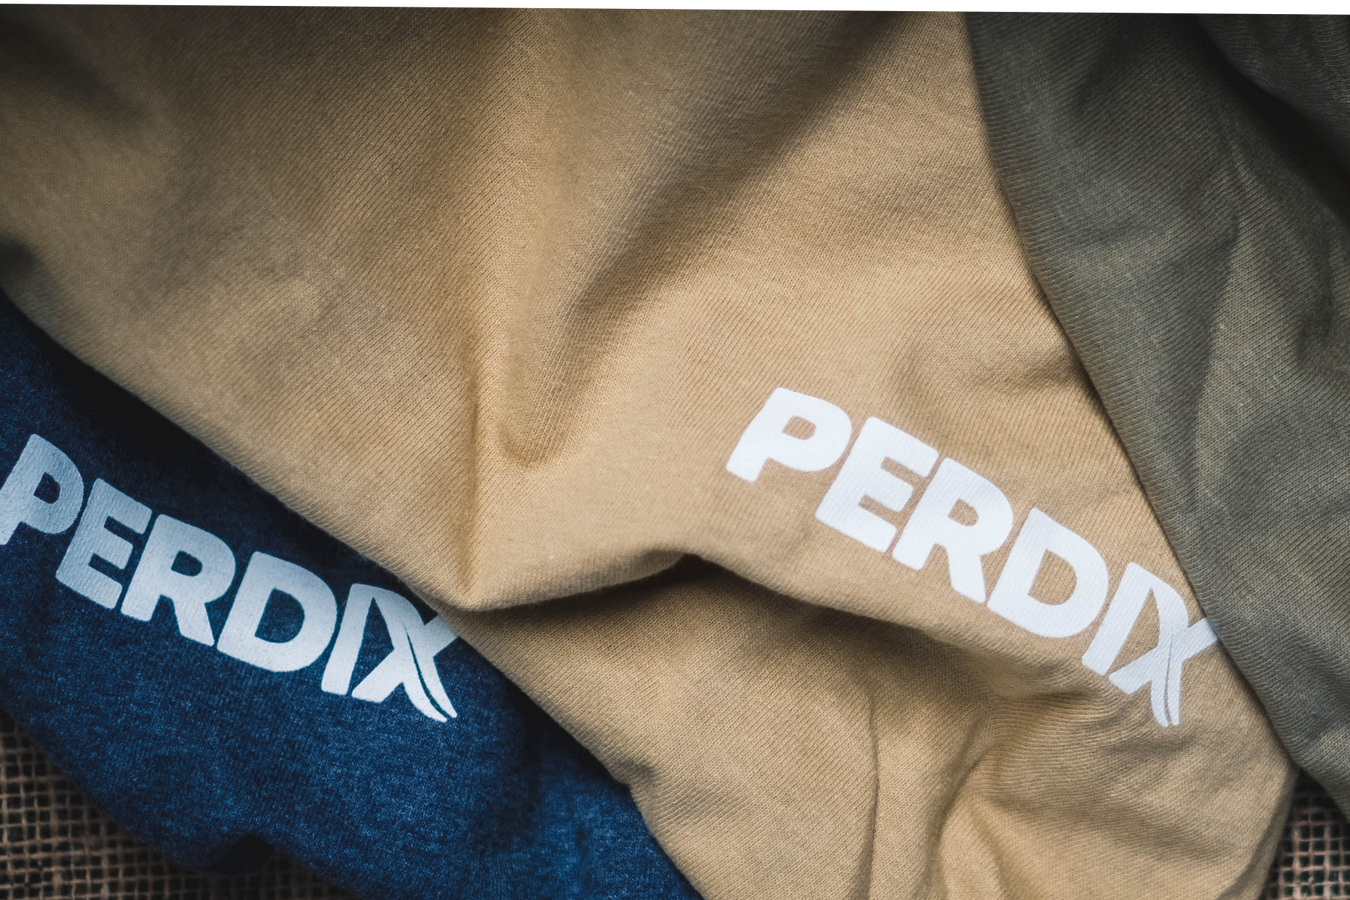 PERDIX branded T shirts. High quality cotton T shirts with PERDIX logo on chest - Show fellow wildlife professionals you use a quality outfitter for your wildlife equipment.